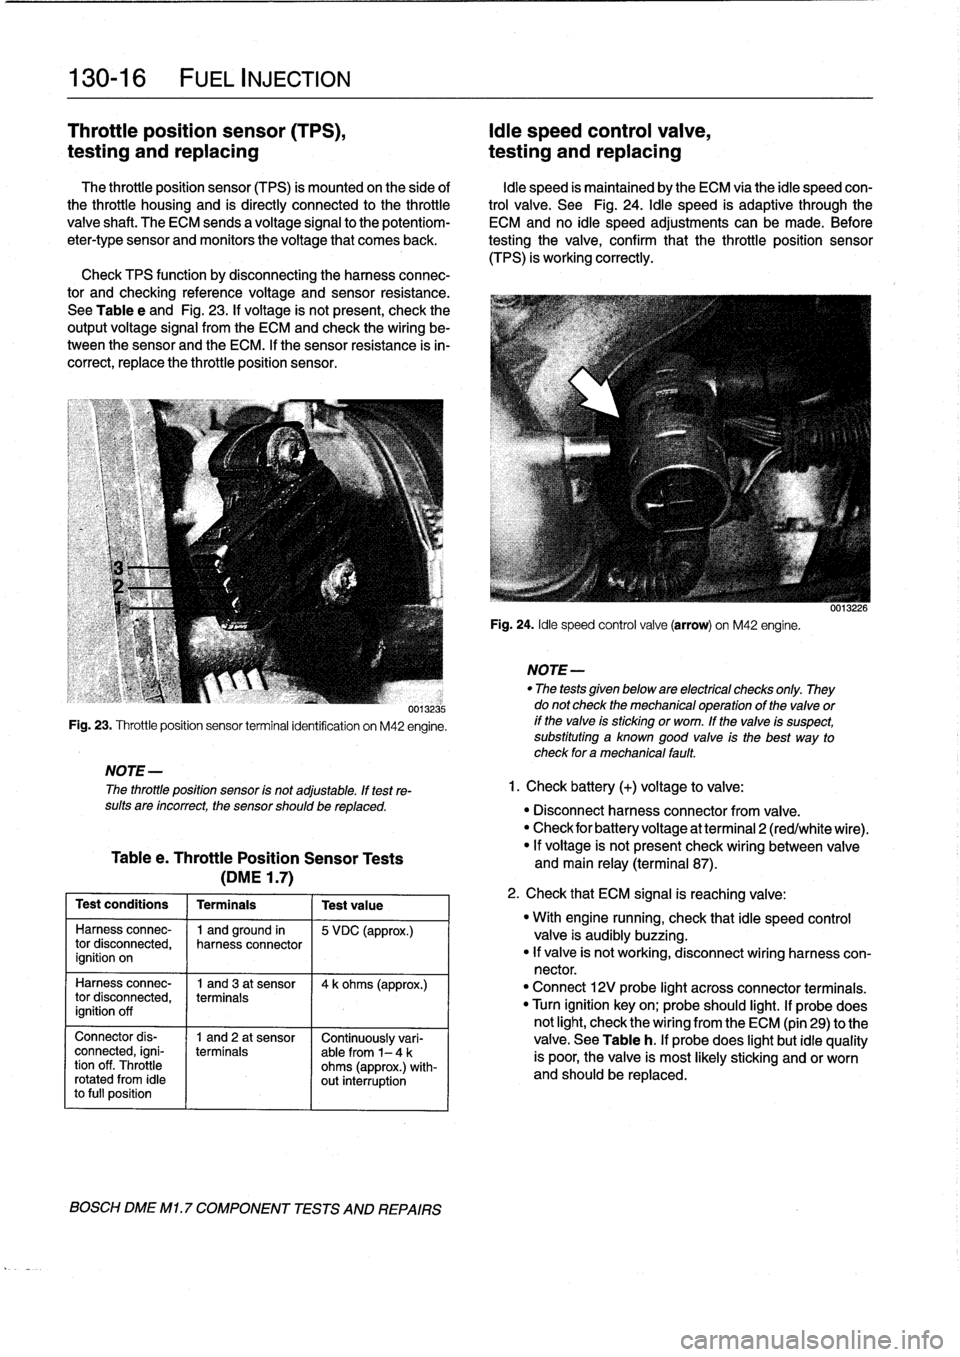 BMW 318i 1997 E36 Owners Manual 
130-
1
6

	

FUEL
INJECTION

Throttie
position
sensor
(TPS),

	

Idie
speed
control
valve,
testing
and
replacing

	

testing
and
replacing

The
throttie
position
sensor
(TPS)
is
mounted
on
the
side
o